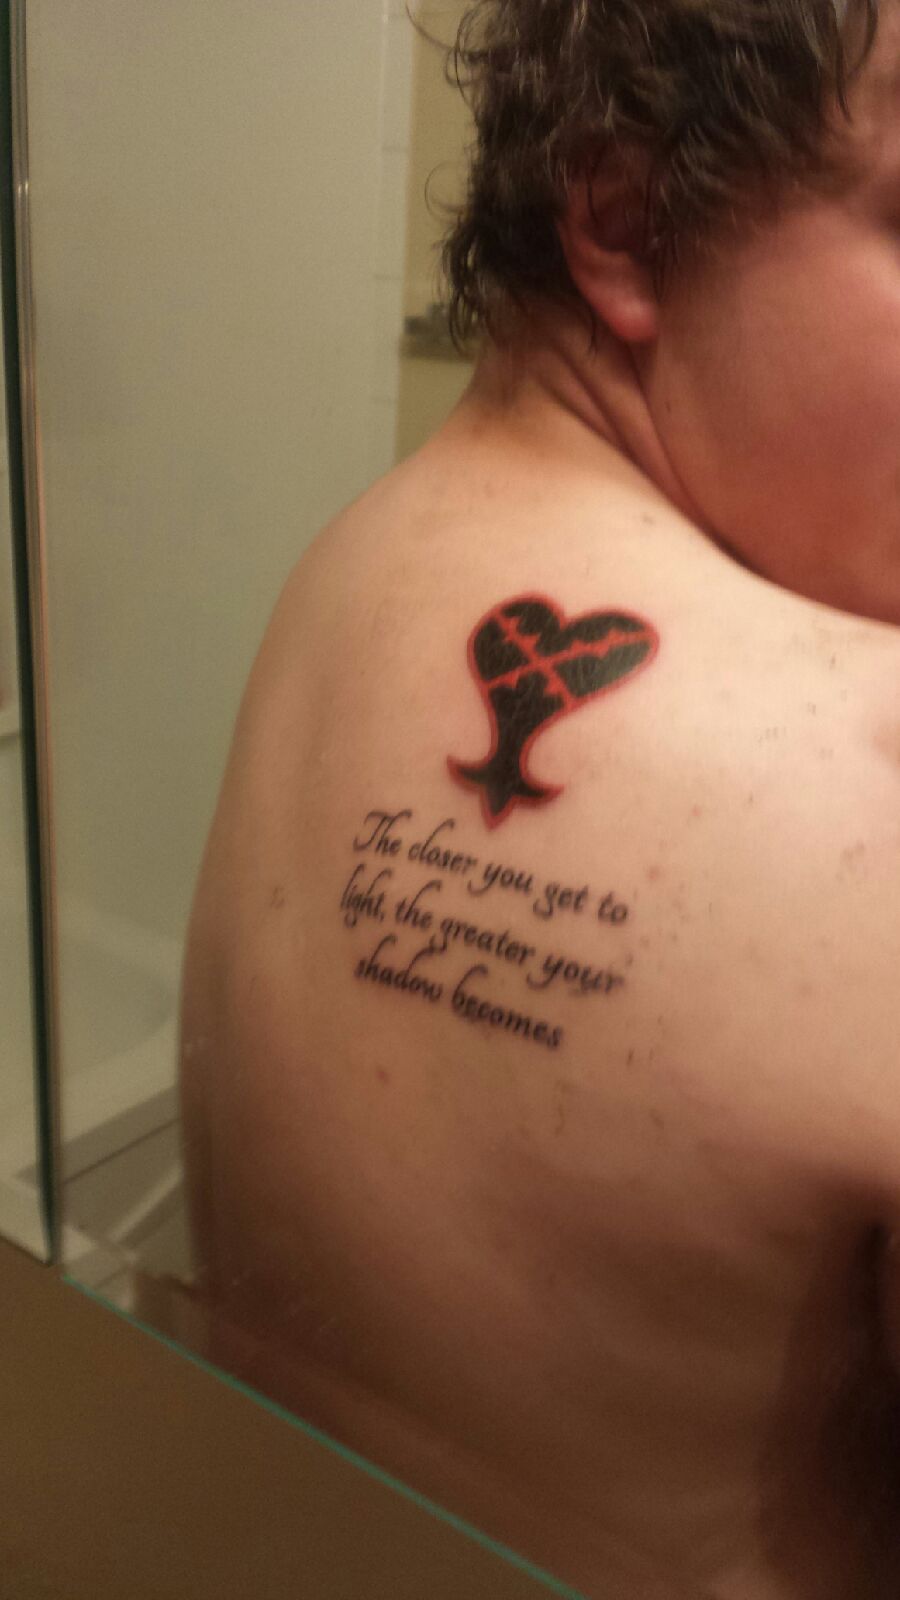 First tattoo  Heartless Nobody done by Travis at Black Dragon in Biloxi MS   Kingdom hearts tattoo Tattoos Tattoos for guys